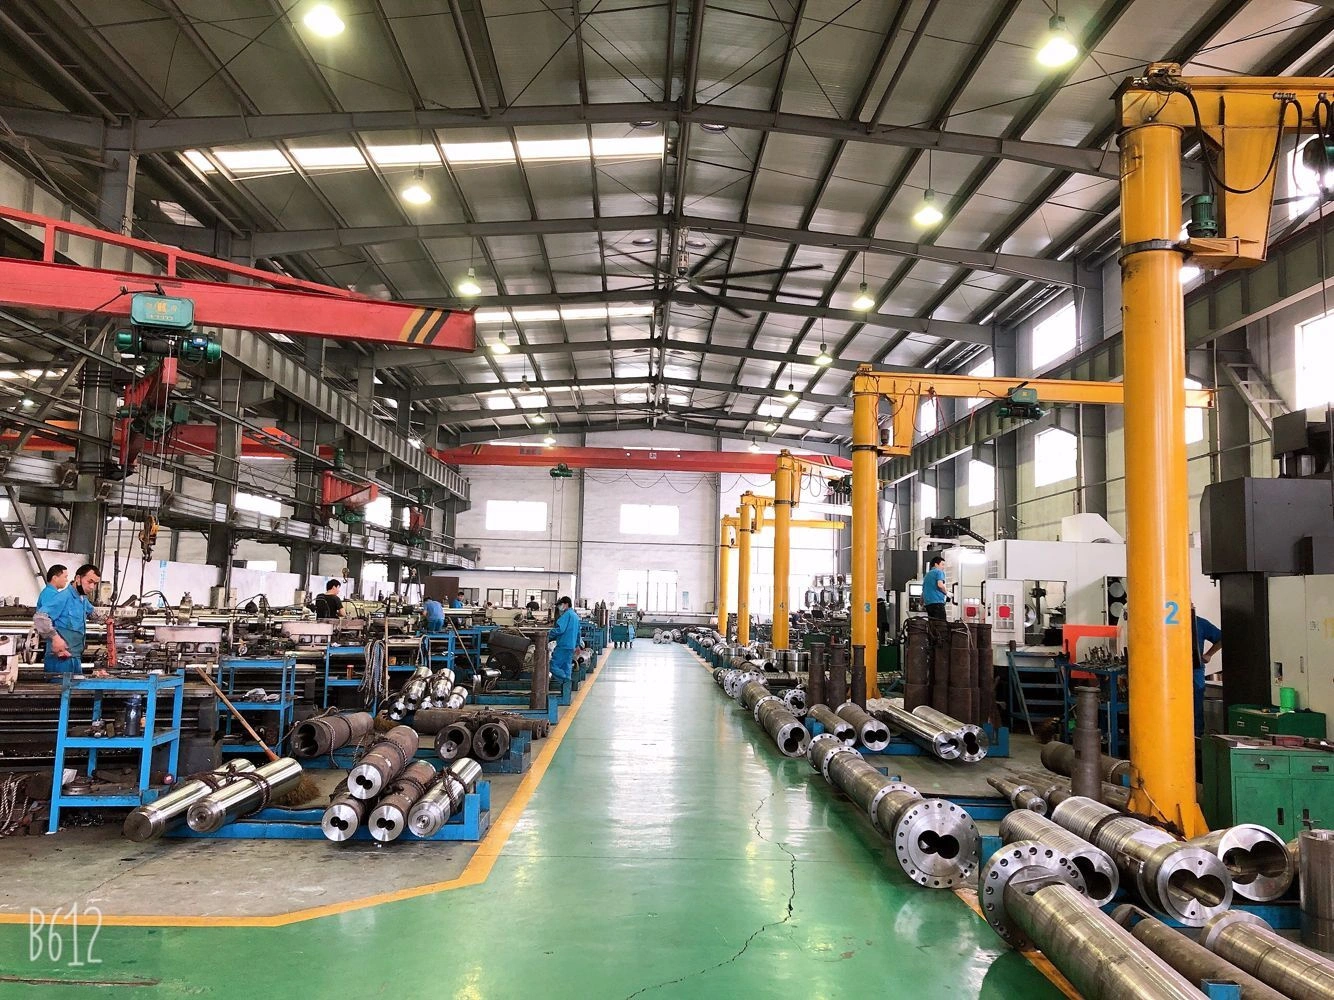 twin screw barrel manufacturer, E.J.S INDUSTRY CO., LTD, your go-to manufacturer and long term partner, helps many customers grow bigger and better.